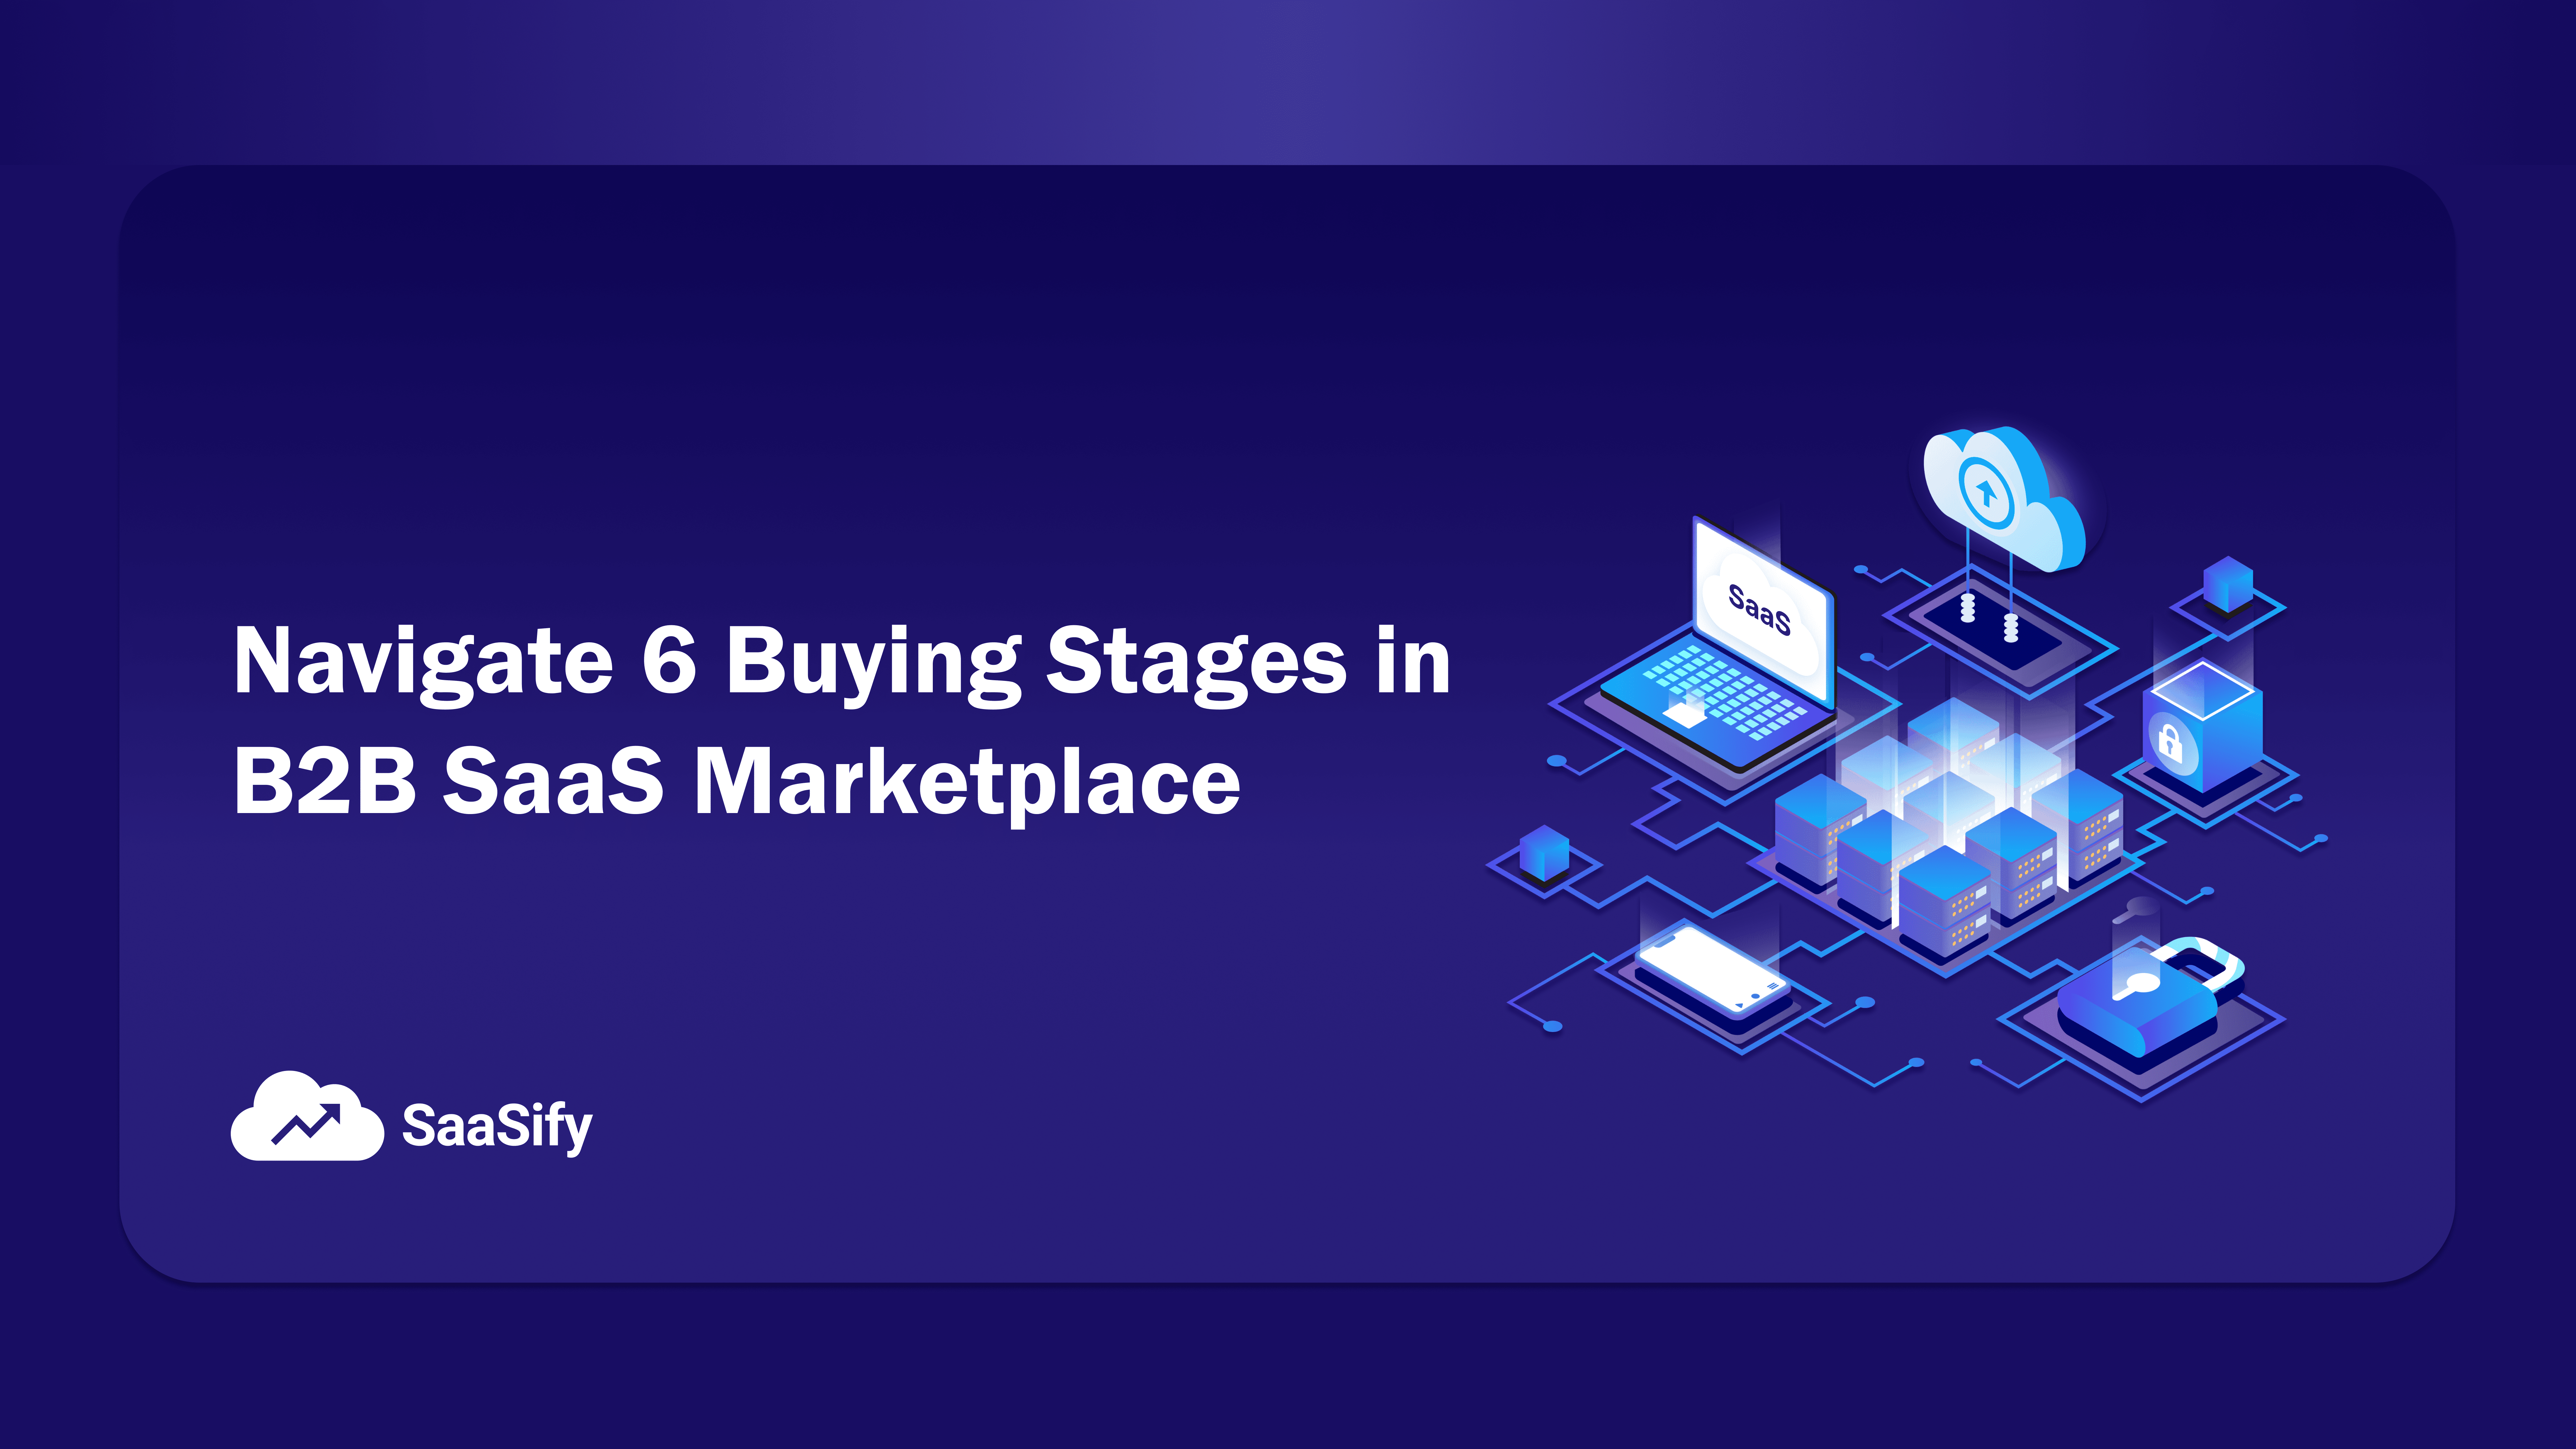 How to navigate the 6 buying stages in the B2B SaaS Marketplace